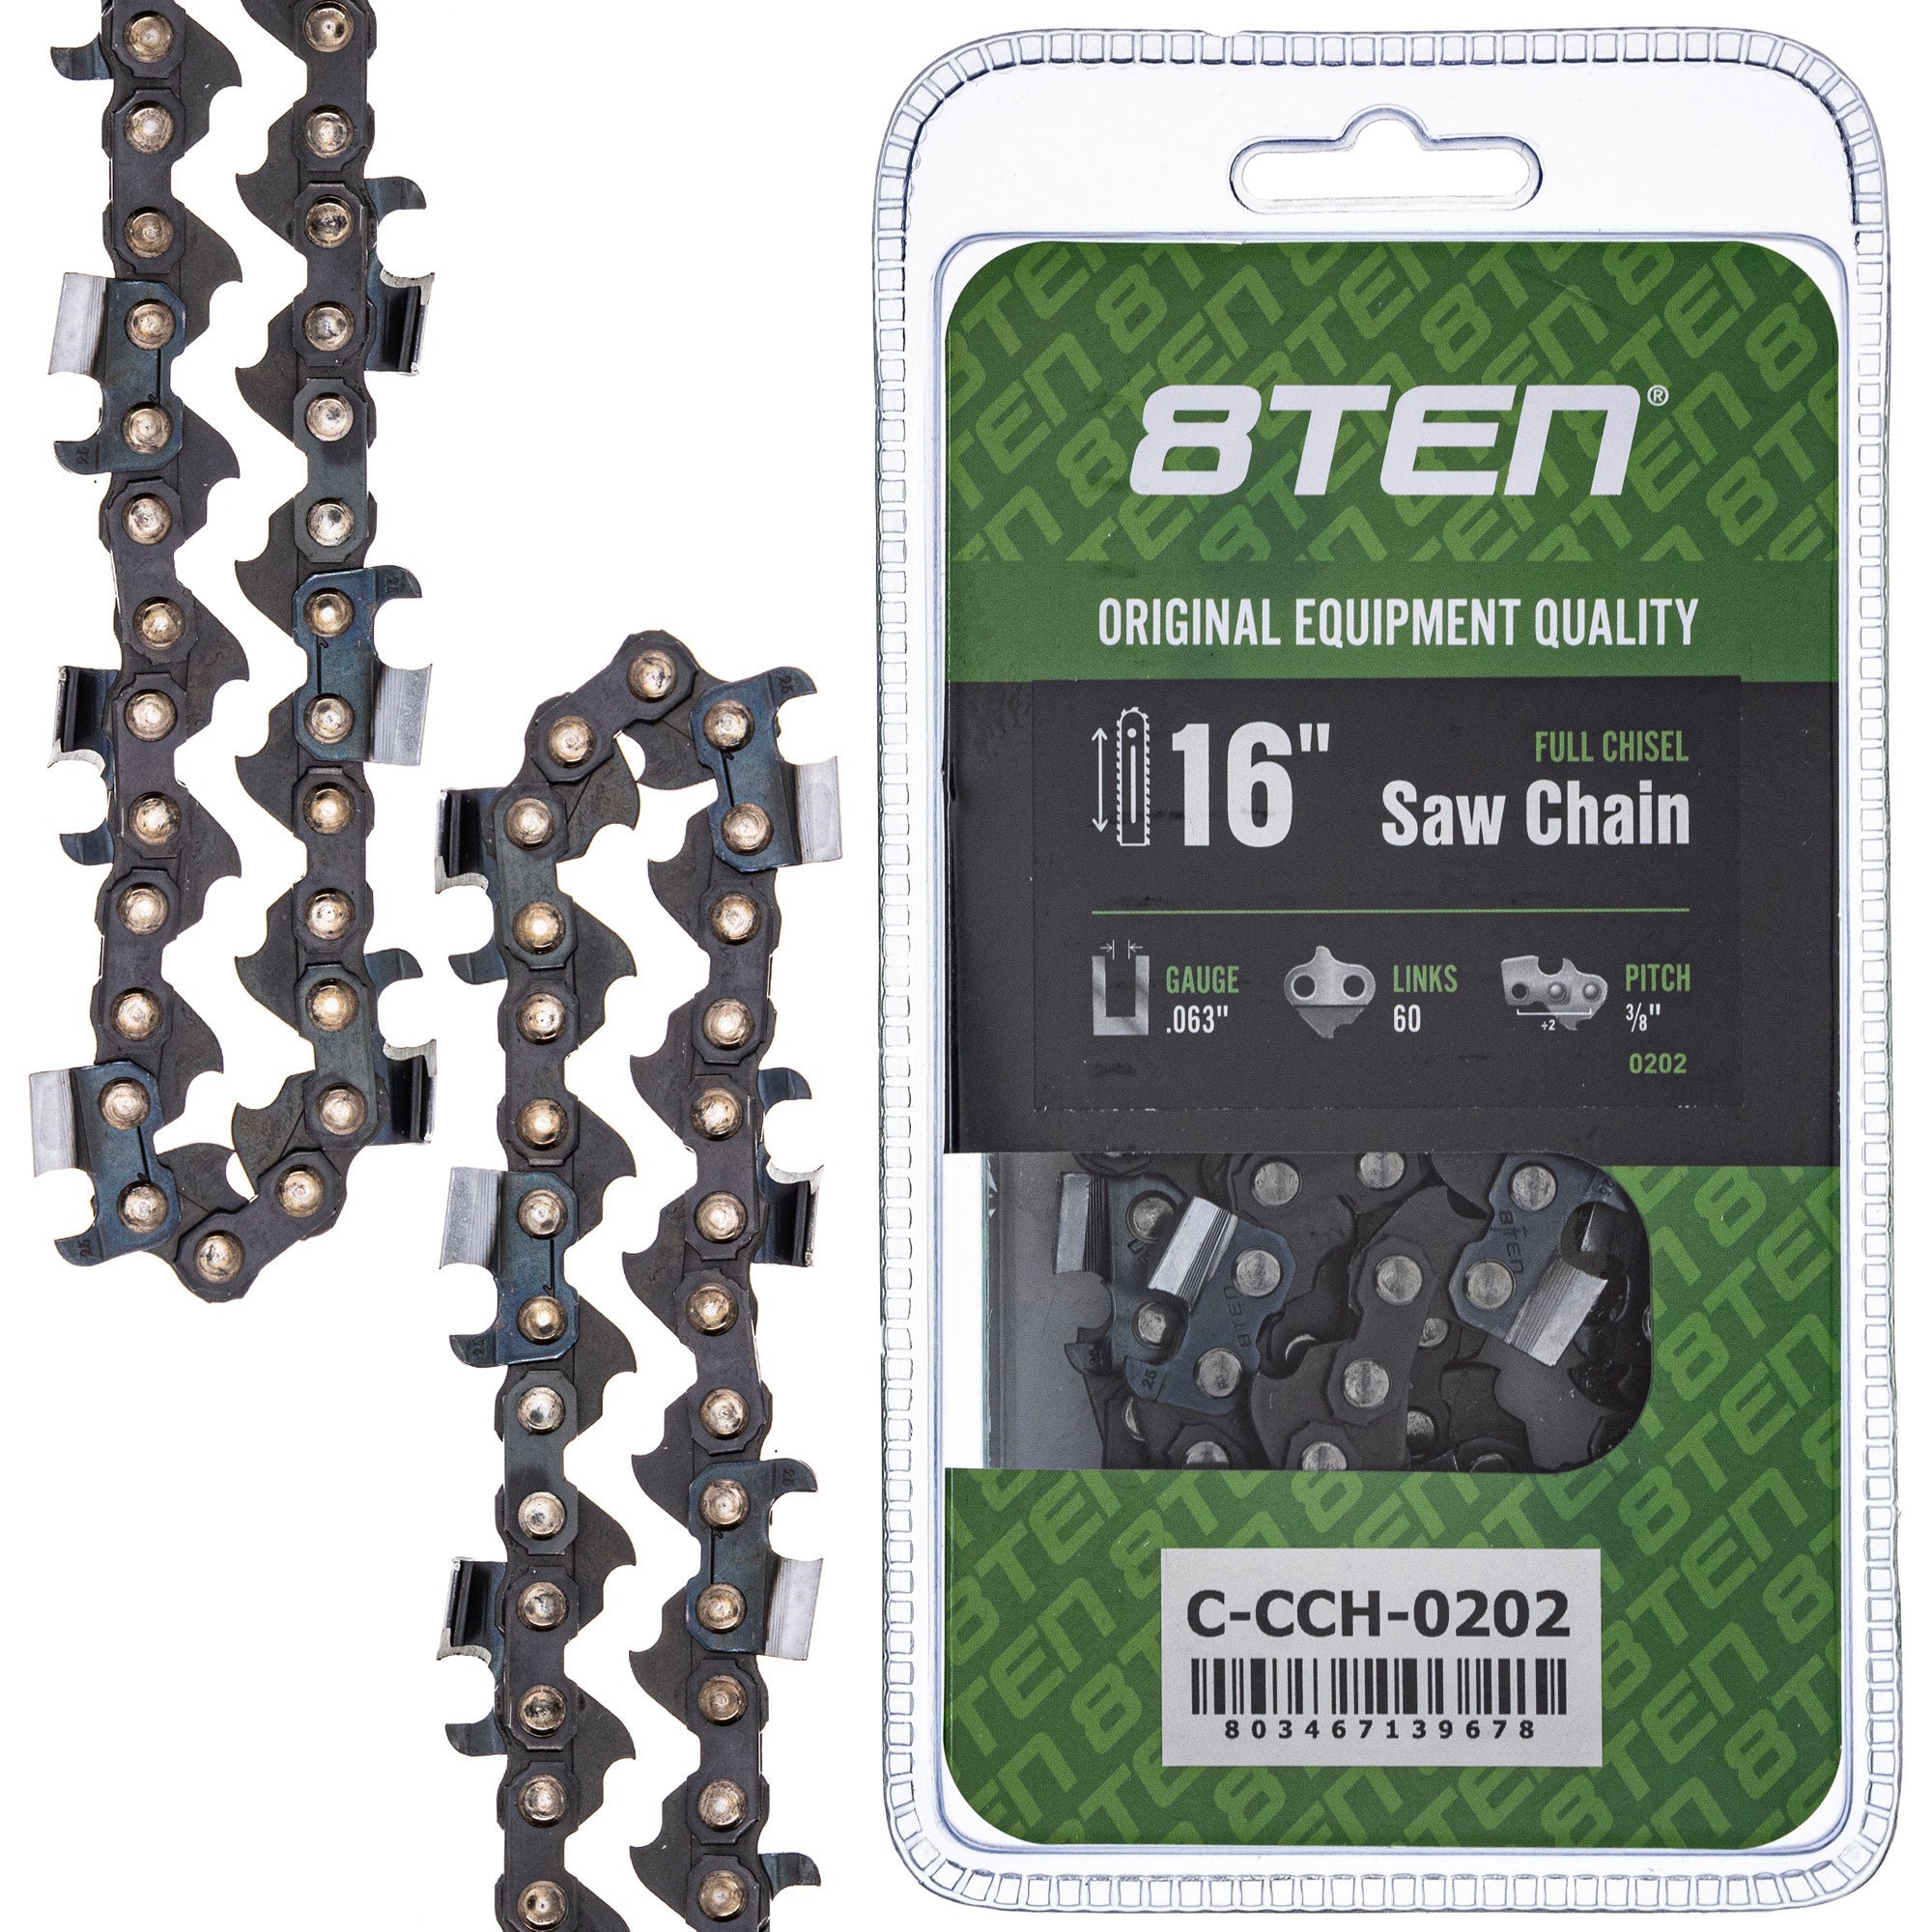 8TEN MK1010473 Guide Bar & Chain for MSE MS E 066